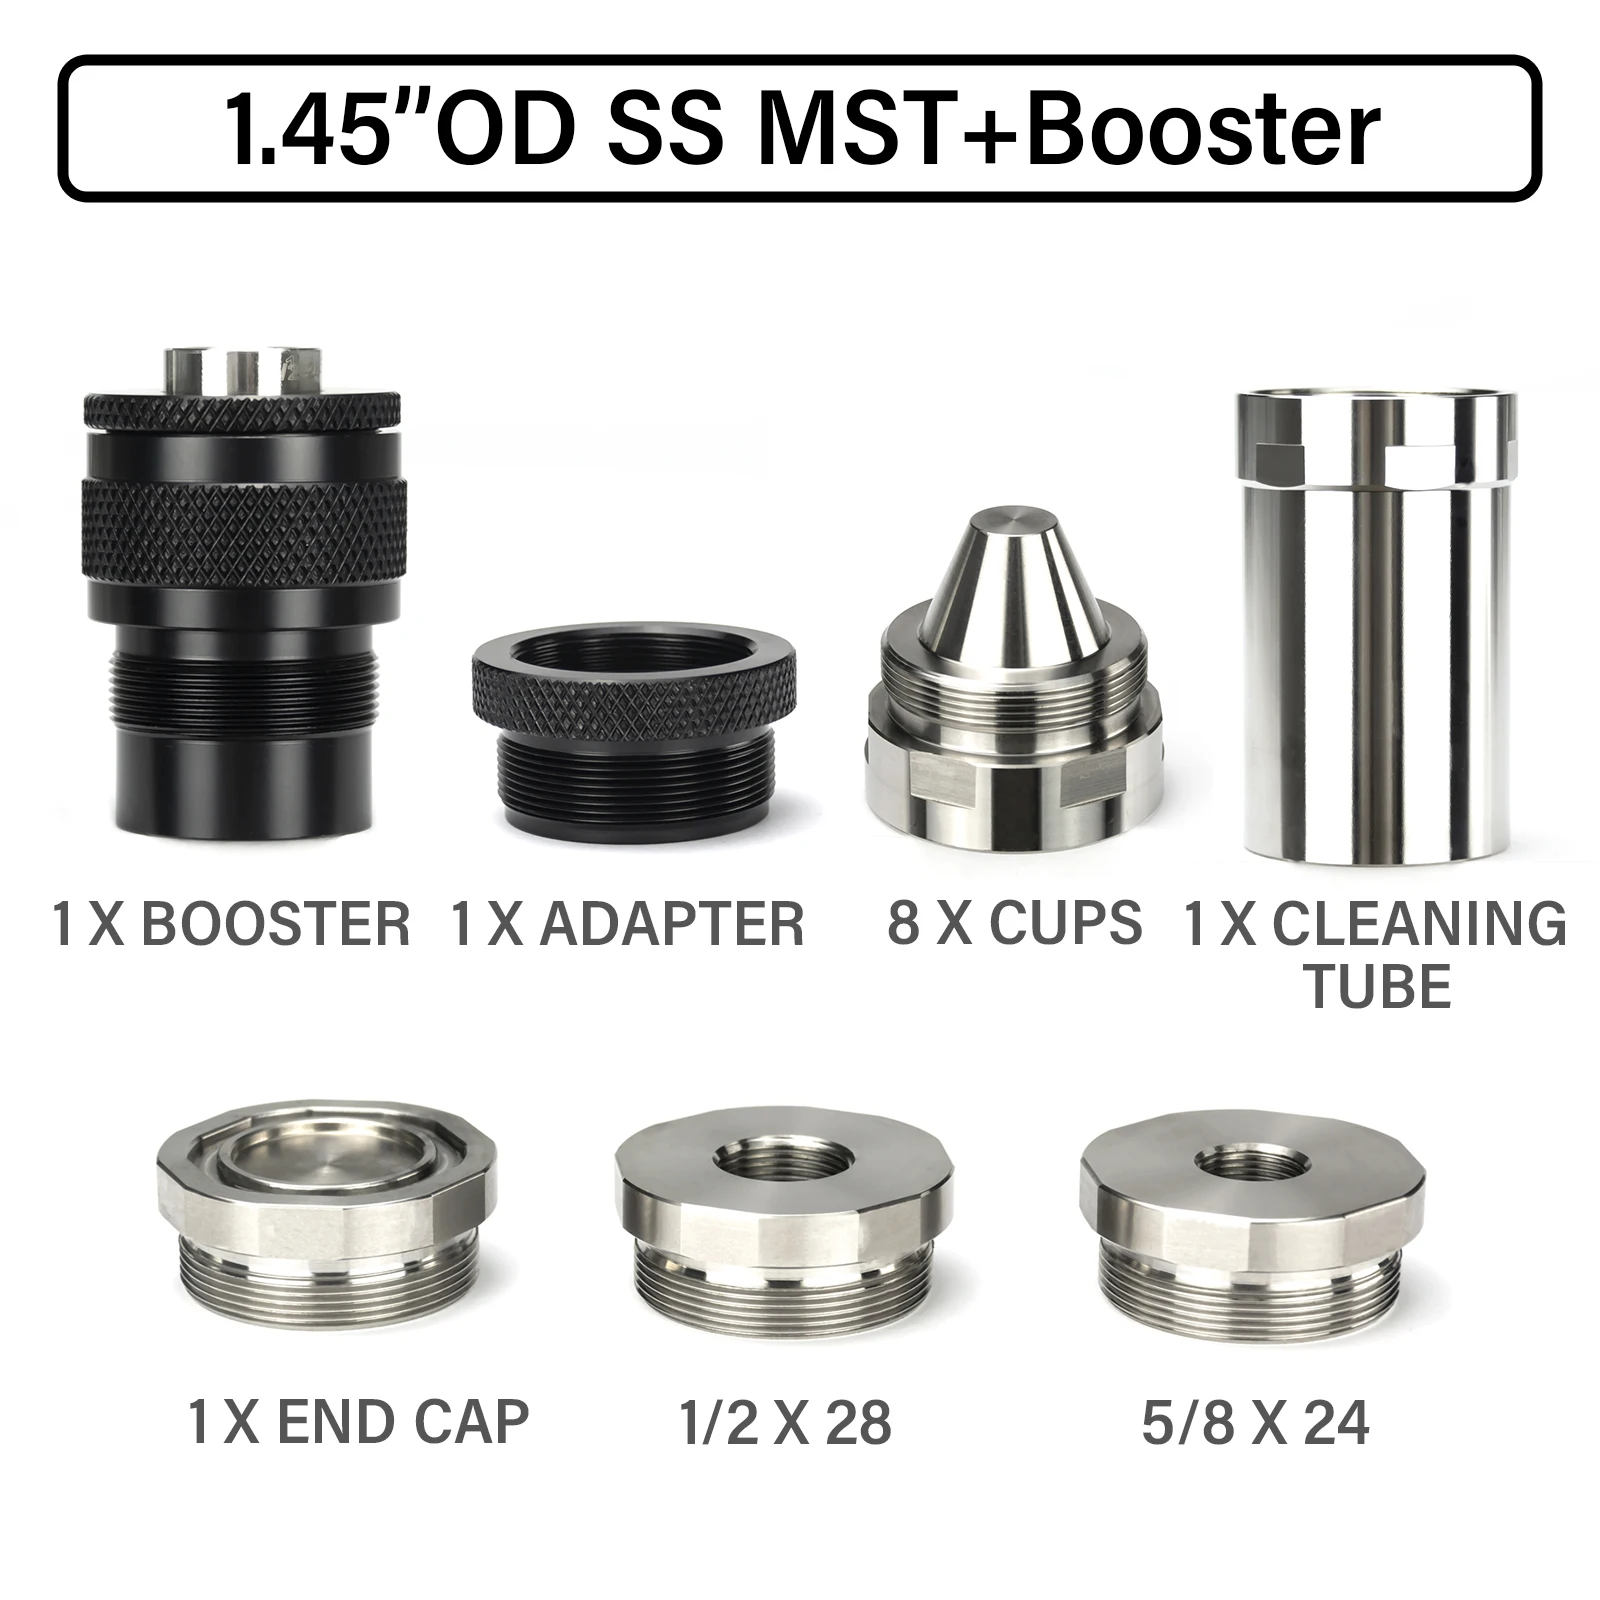 

7"L 1.5"OD 17-4 Stainless Steel Dodecagonal Modular Solvent Tube 1.375x24 MST Filter 8pcs Cone Cups 5/8x24 + 1/2x28 with Booster